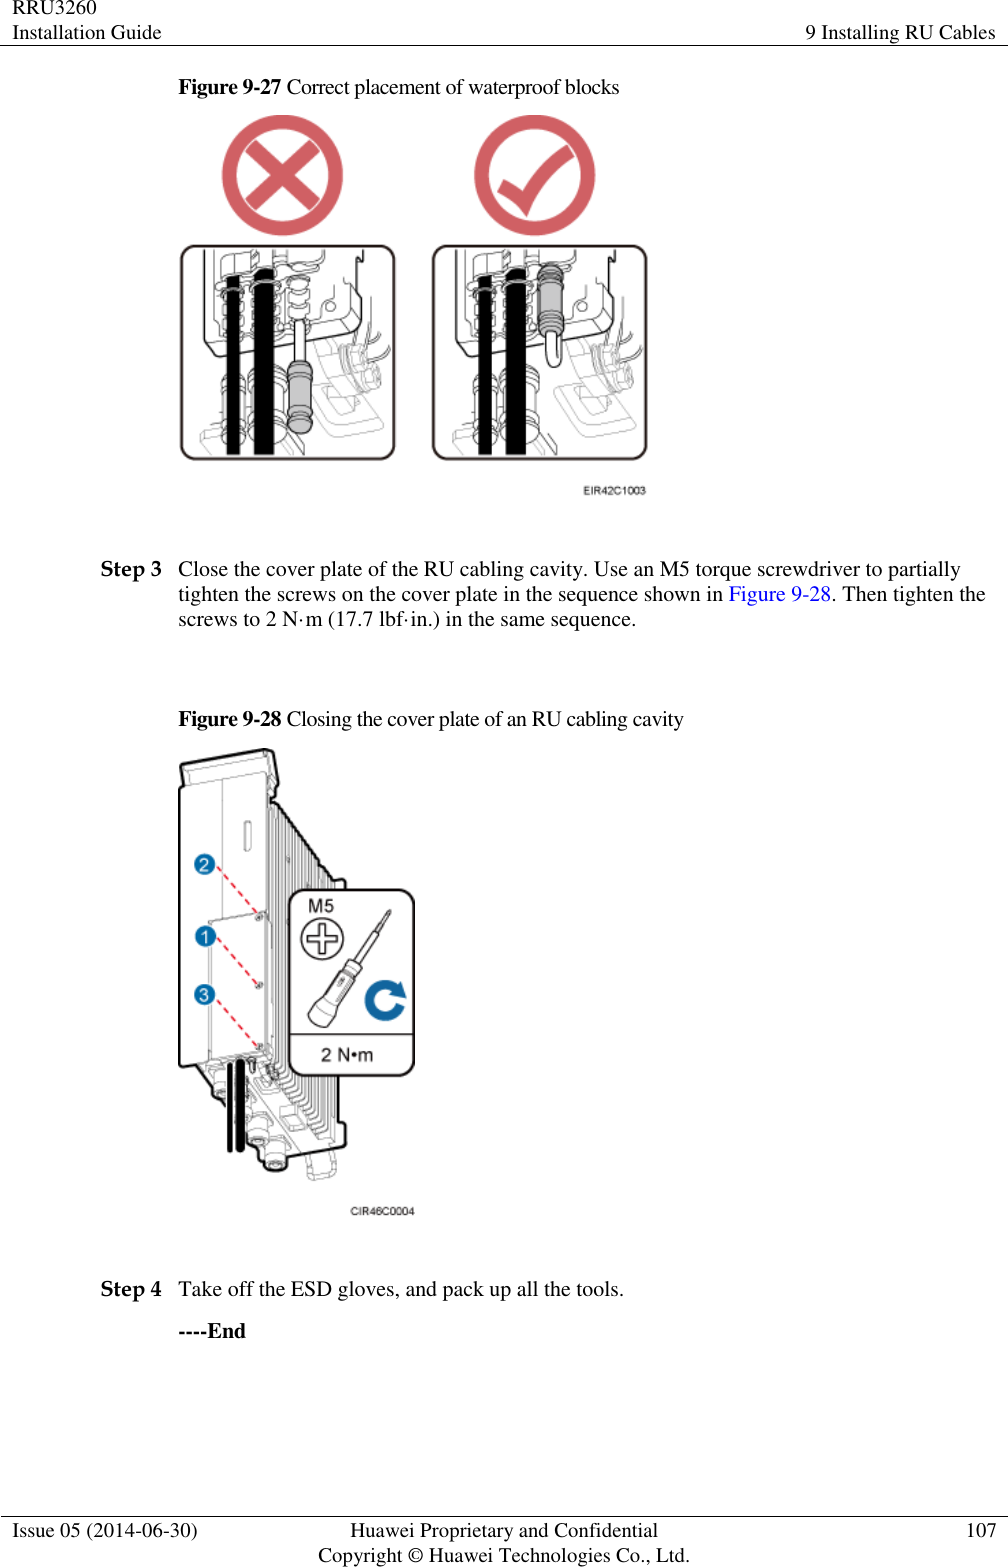 RRU3260 Installation Guide 9 Installing RU Cables  Issue 05 (2014-06-30) Huawei Proprietary and Confidential                                     Copyright © Huawei Technologies Co., Ltd. 107  Figure 9-27 Correct placement of waterproof blocks   Step 3 Close the cover plate of the RU cabling cavity. Use an M5 torque screwdriver to partially tighten the screws on the cover plate in the sequence shown in Figure 9-28. Then tighten the screws to 2 N·m (17.7 lbf·in.) in the same sequence.  Figure 9-28 Closing the cover plate of an RU cabling cavity   Step 4 Take off the ESD gloves, and pack up all the tools. ----End 